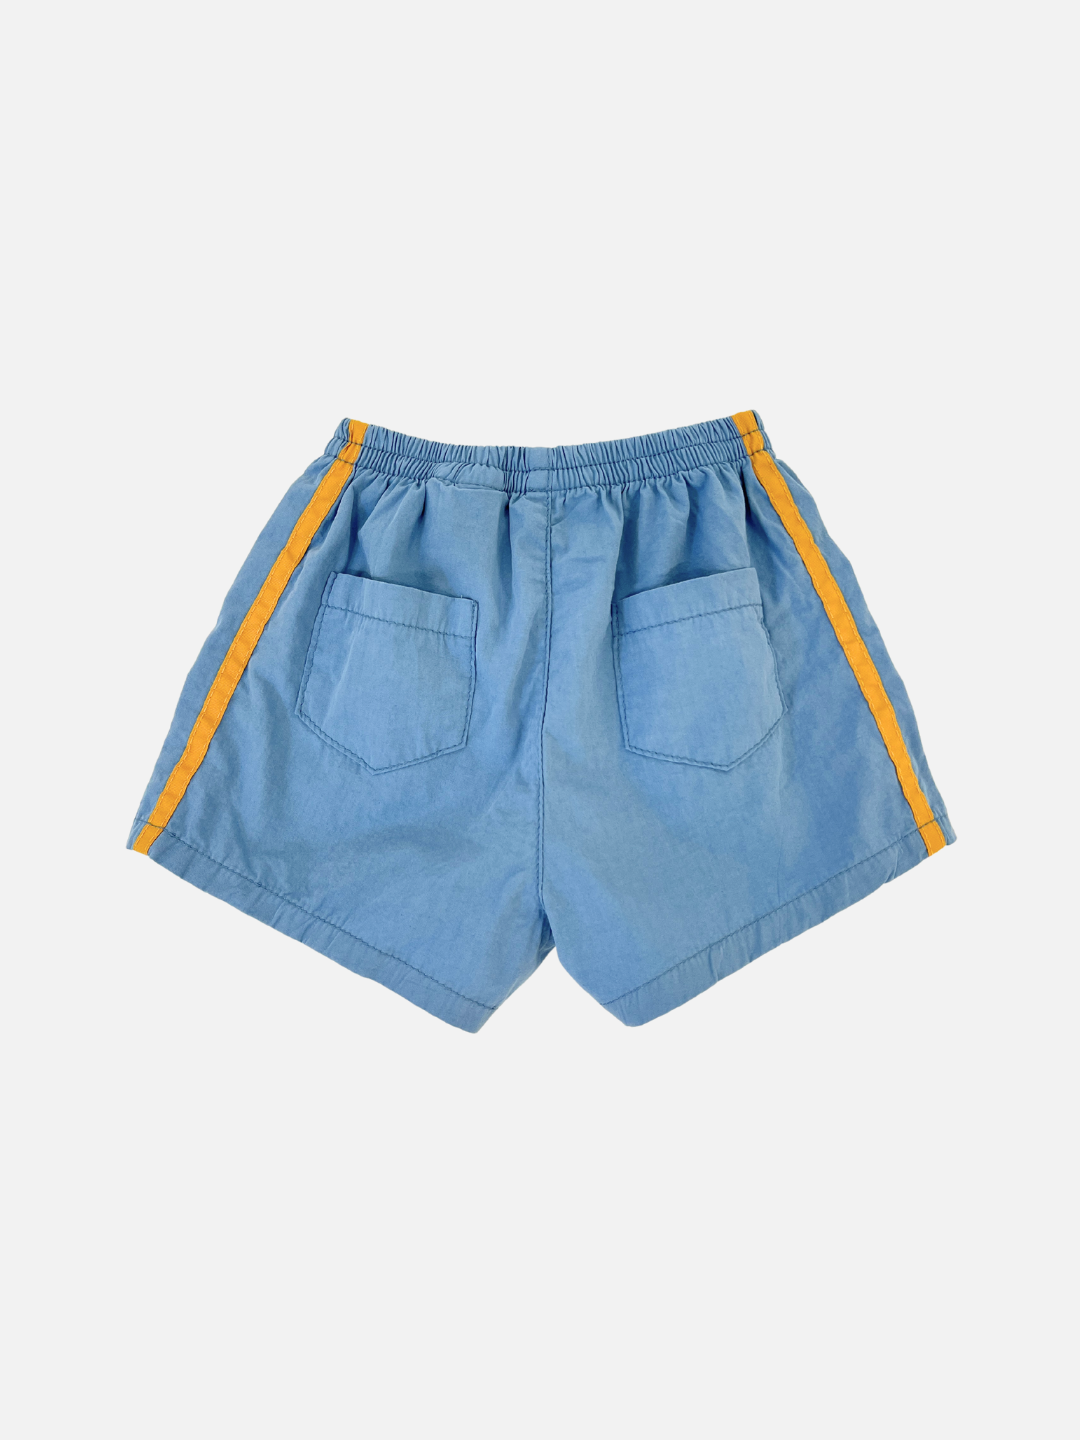 Sky Blue | Back view of the kids' sky blue shorts with yellow stripes on the sides and two back pockets. 